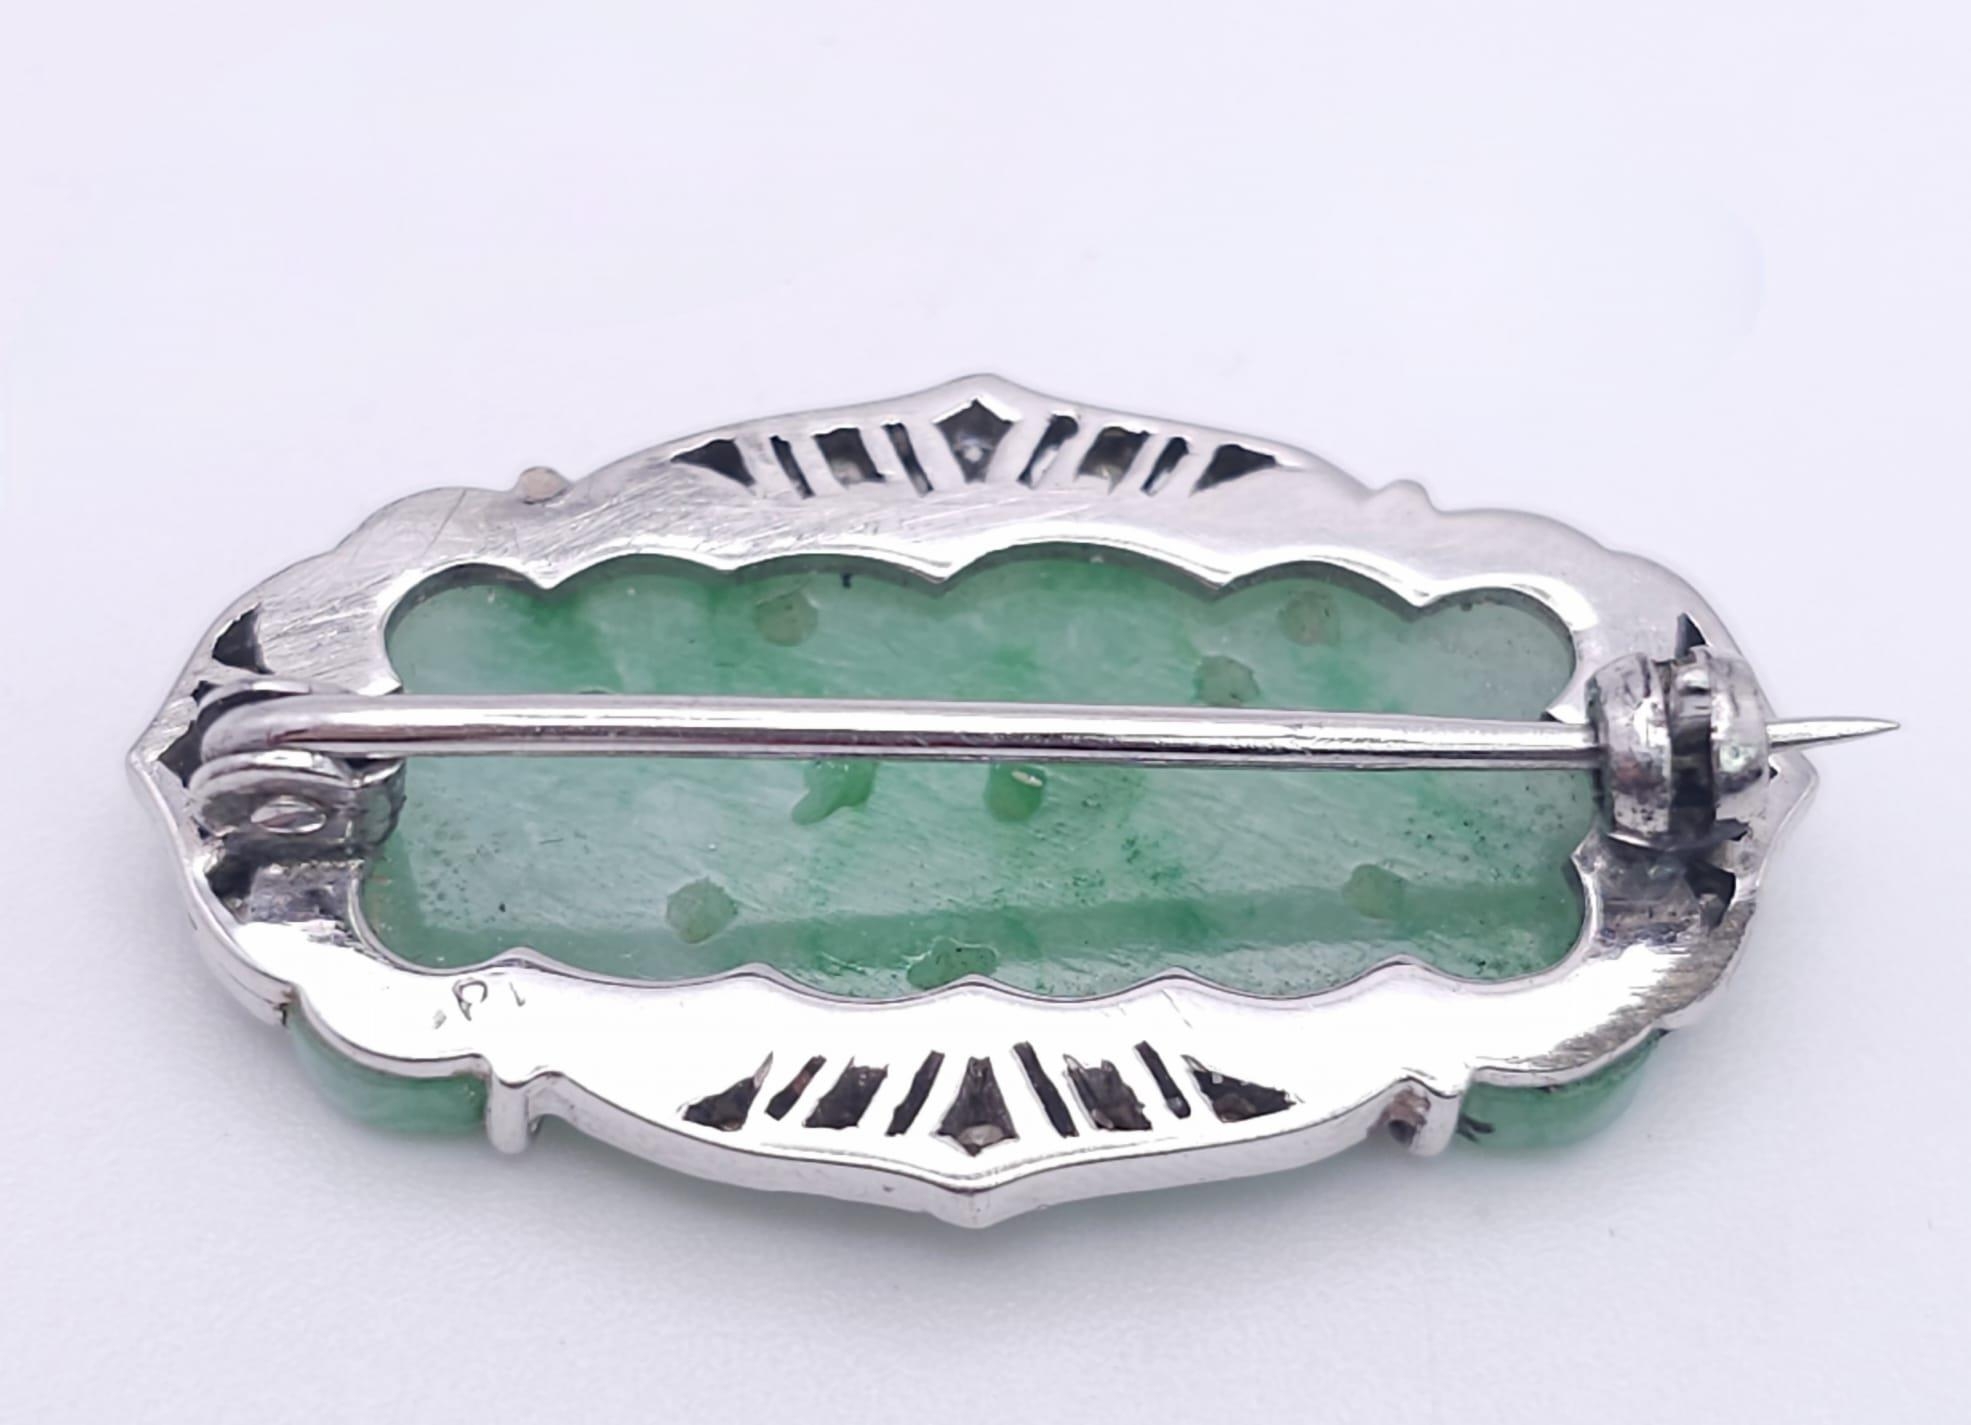 AN ART DECO JADE AND DIAMOND BROOCH SET IN PLATINUM . 6.7gms 3.5cms 15098 - Image 3 of 6